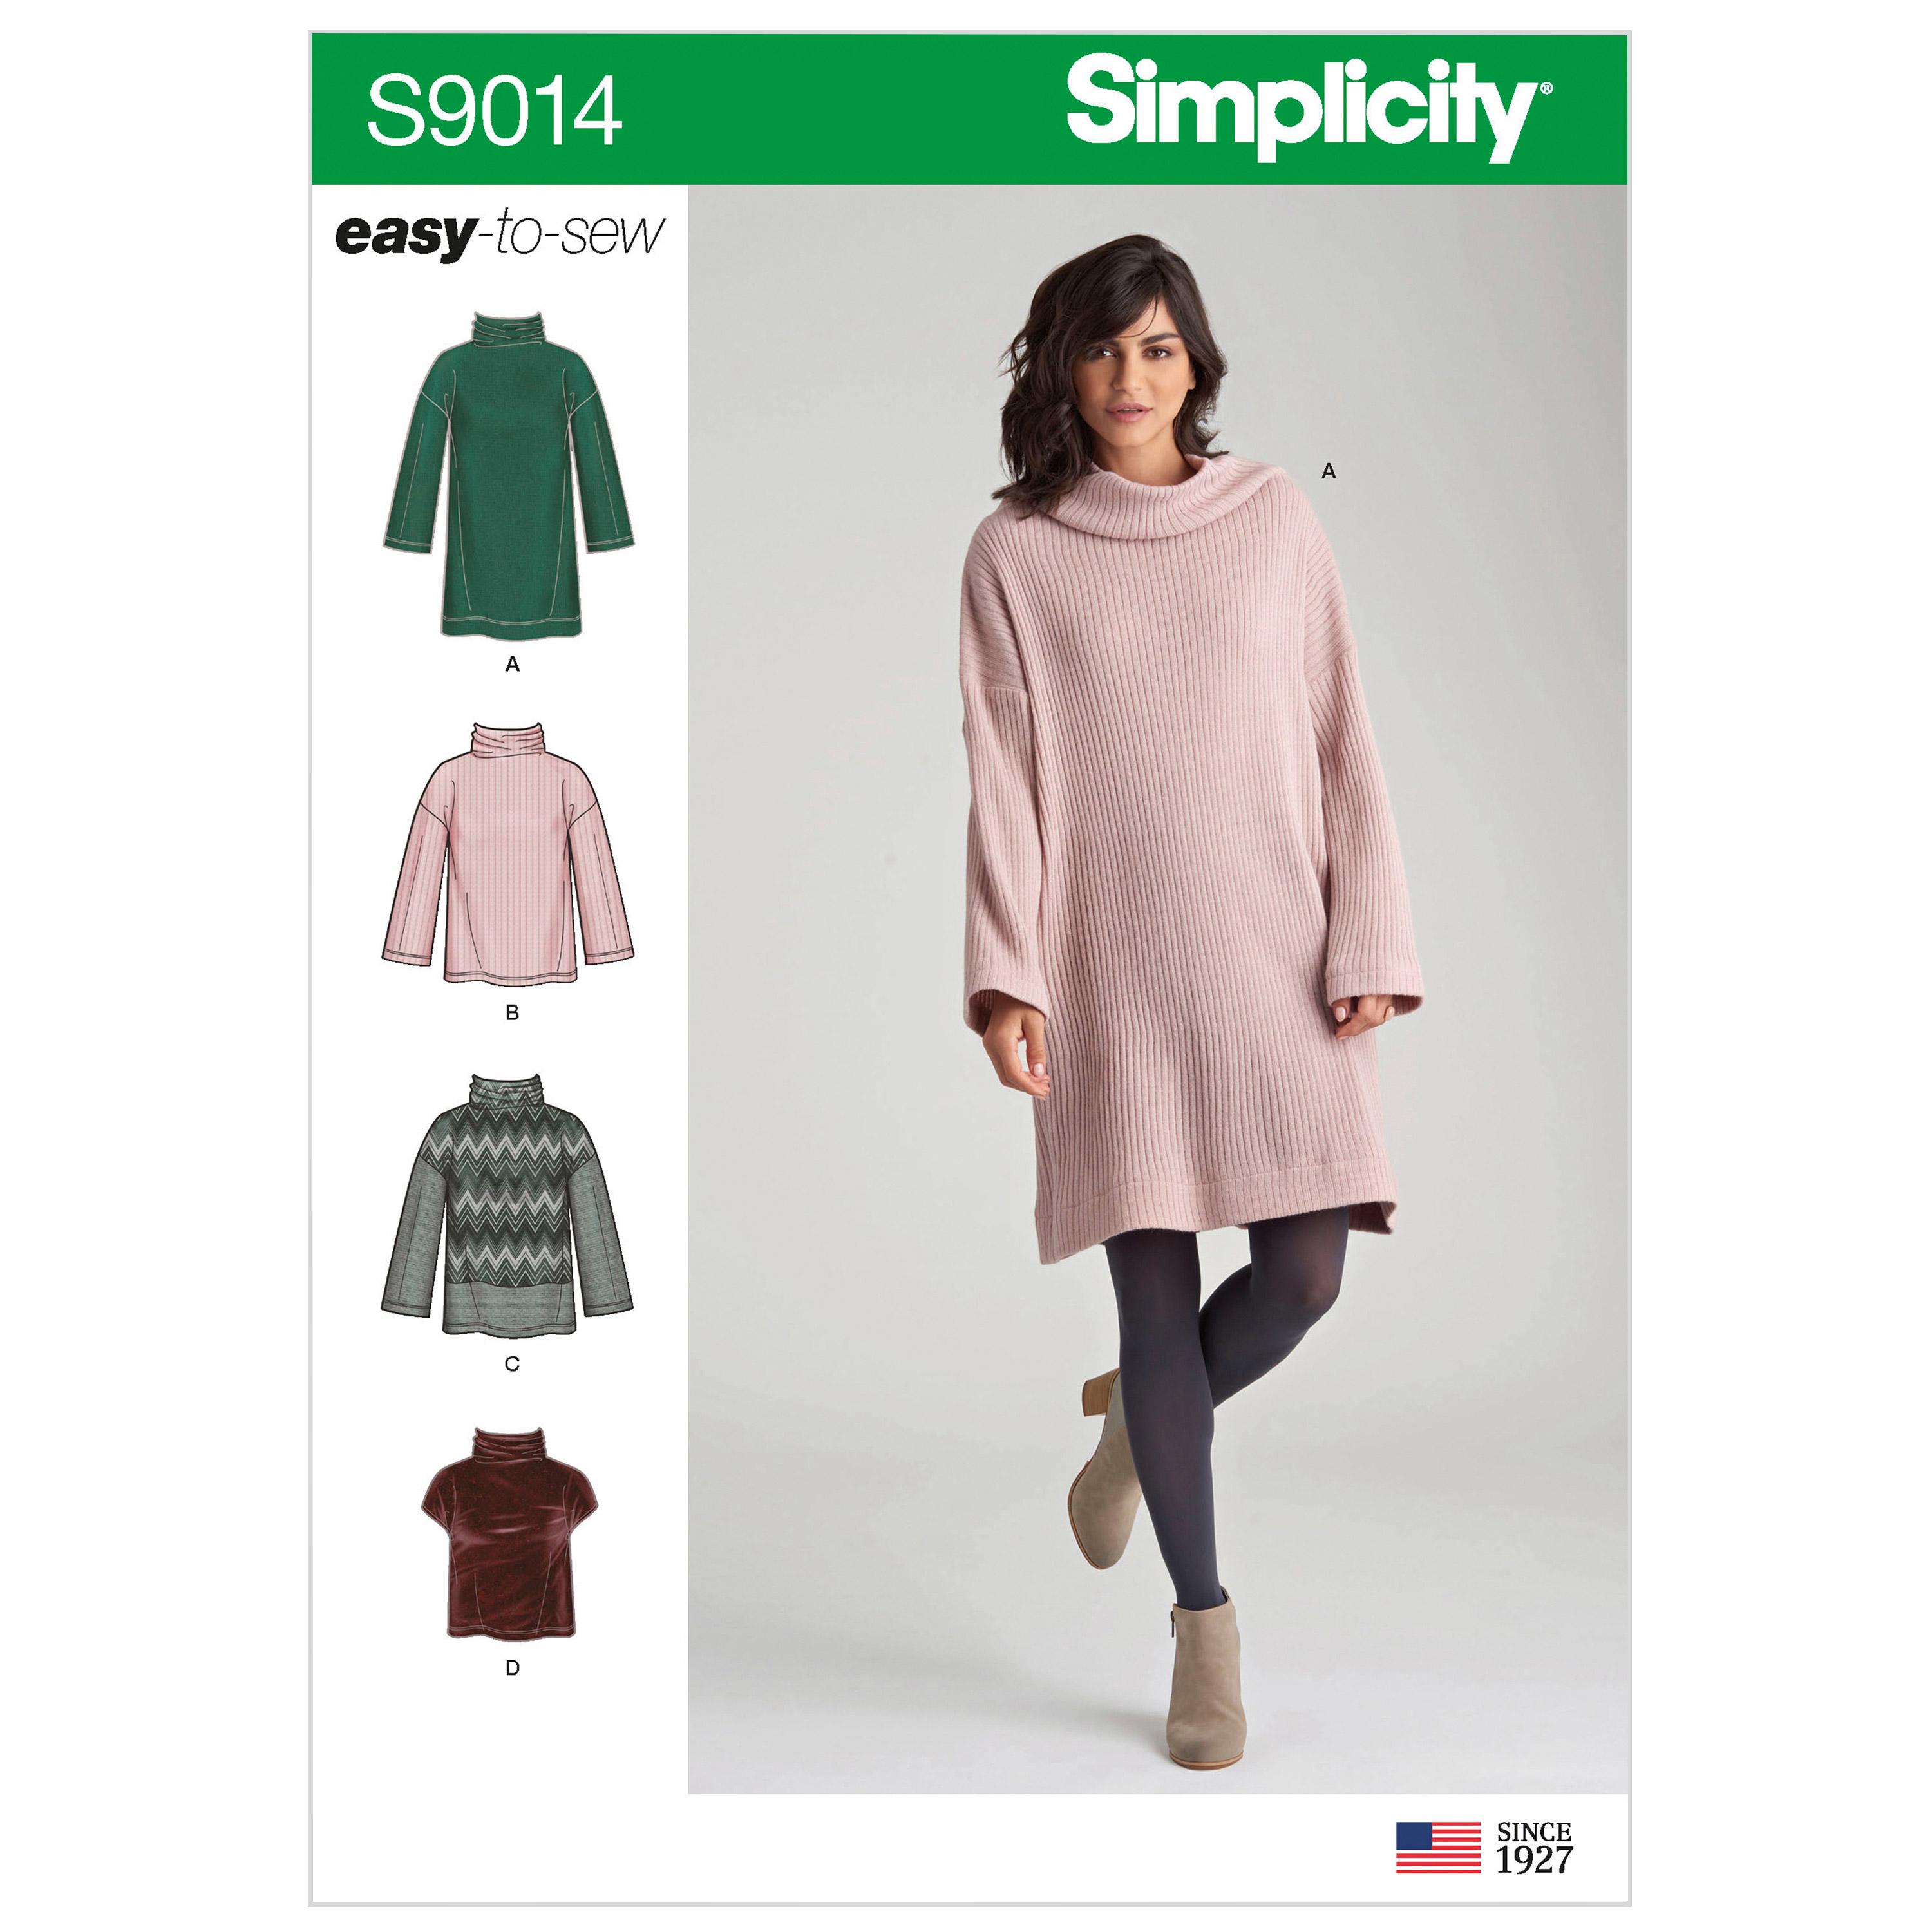 Simplicity S9014 Misses' Knit Tops with Variations